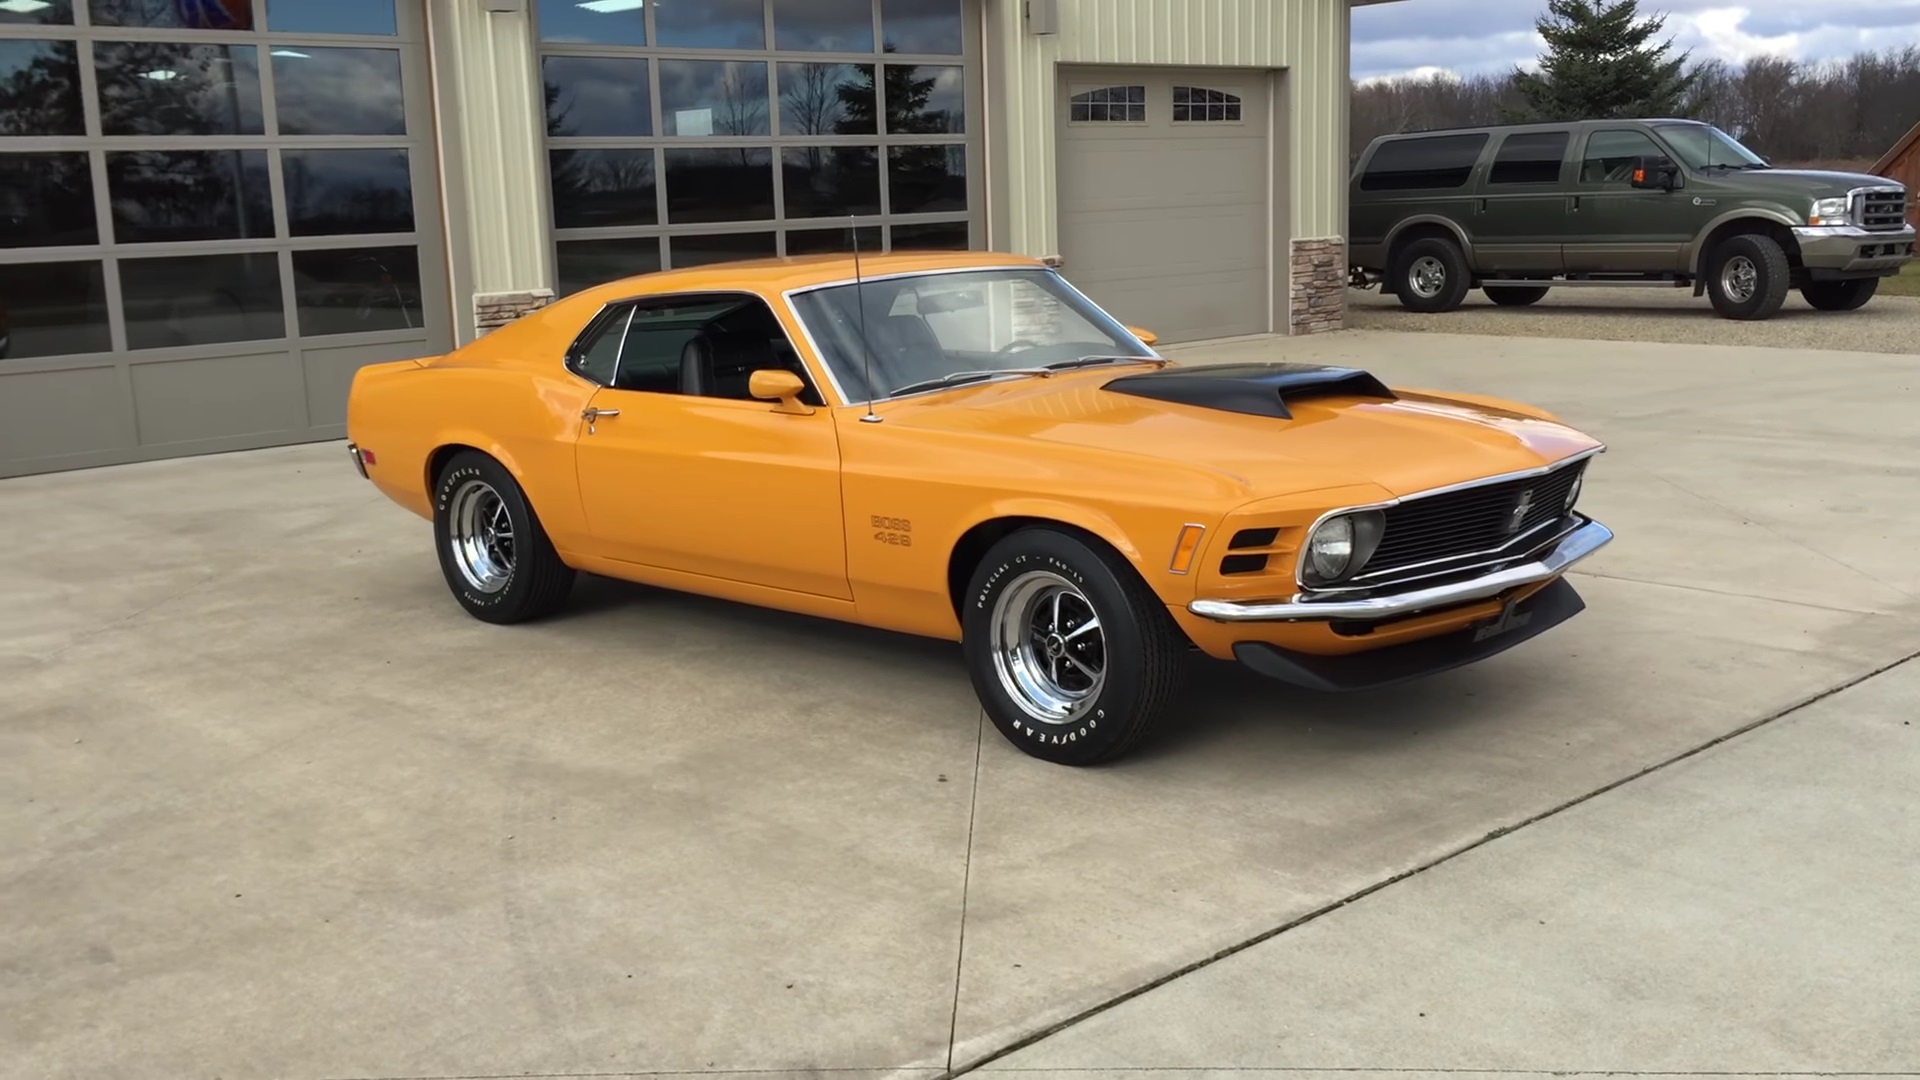 Video: Take A Look At This Beautiful Restored 1970 Ford Mustang Boss 429